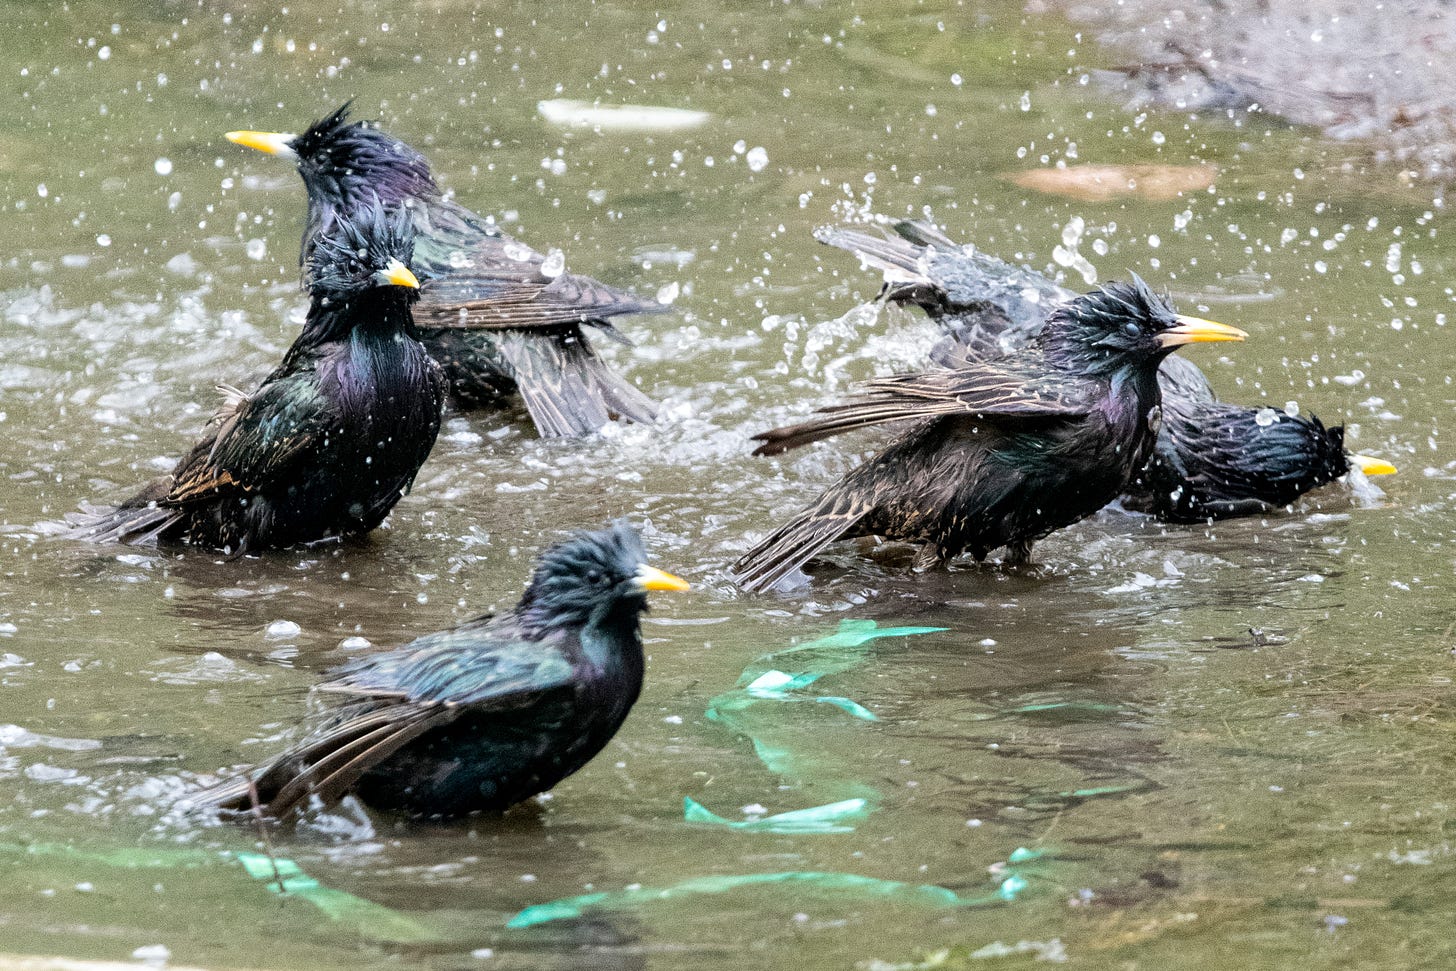 Five European starlings sopping wet, three standing in pondwater, one dunking itself, and another shaking its wings